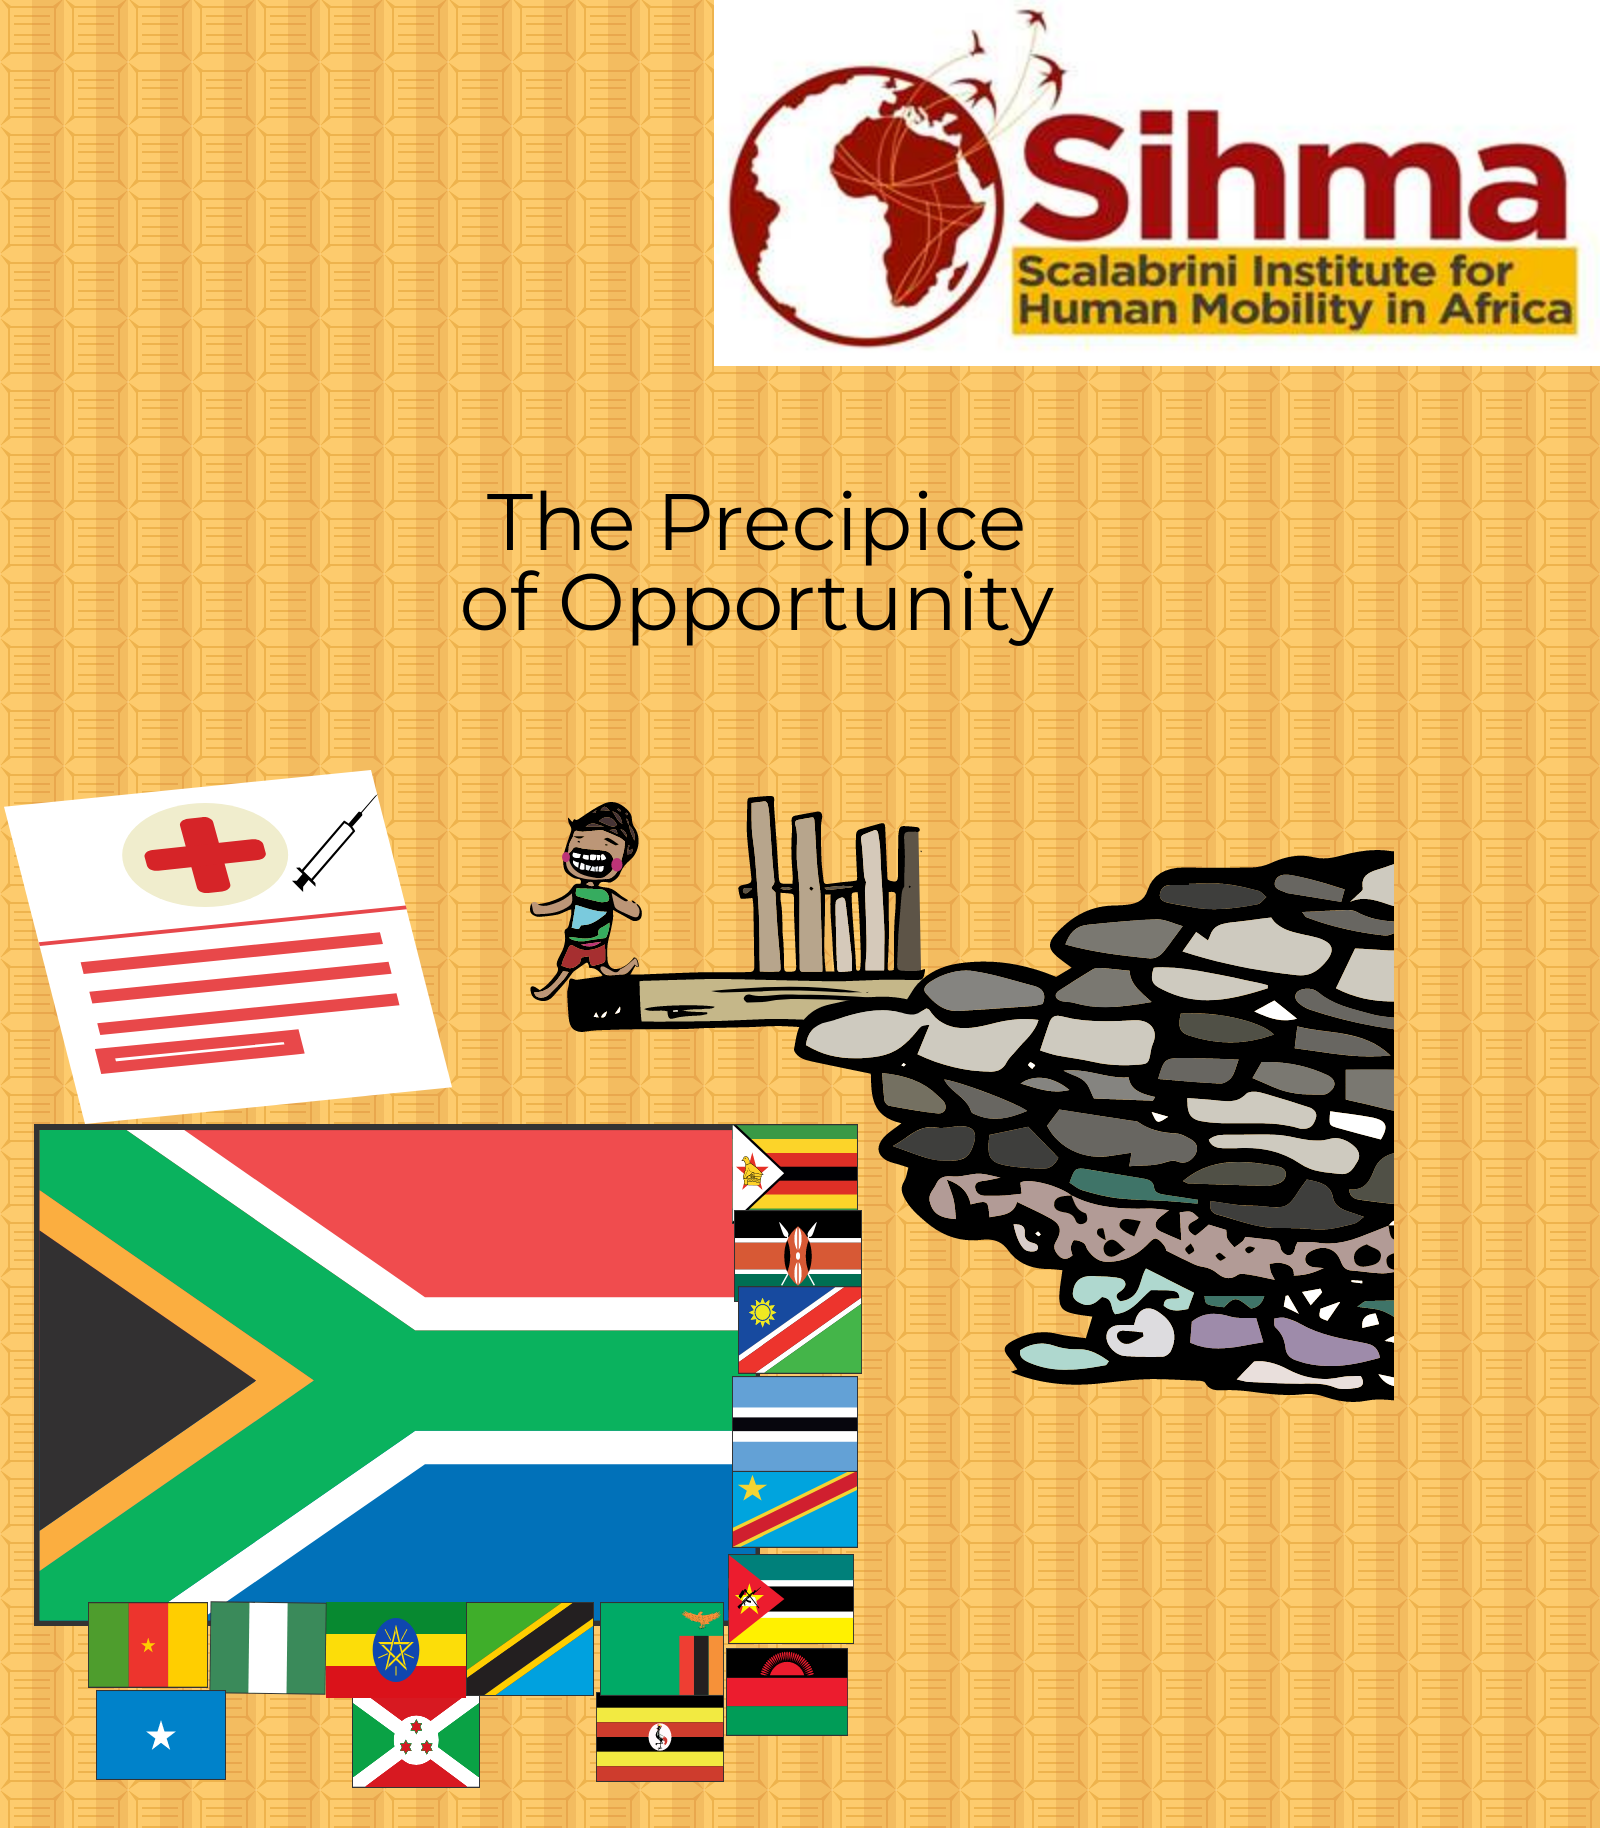 https://www.sihma.org.za/photos/shares/blog precipice of opportunity.png